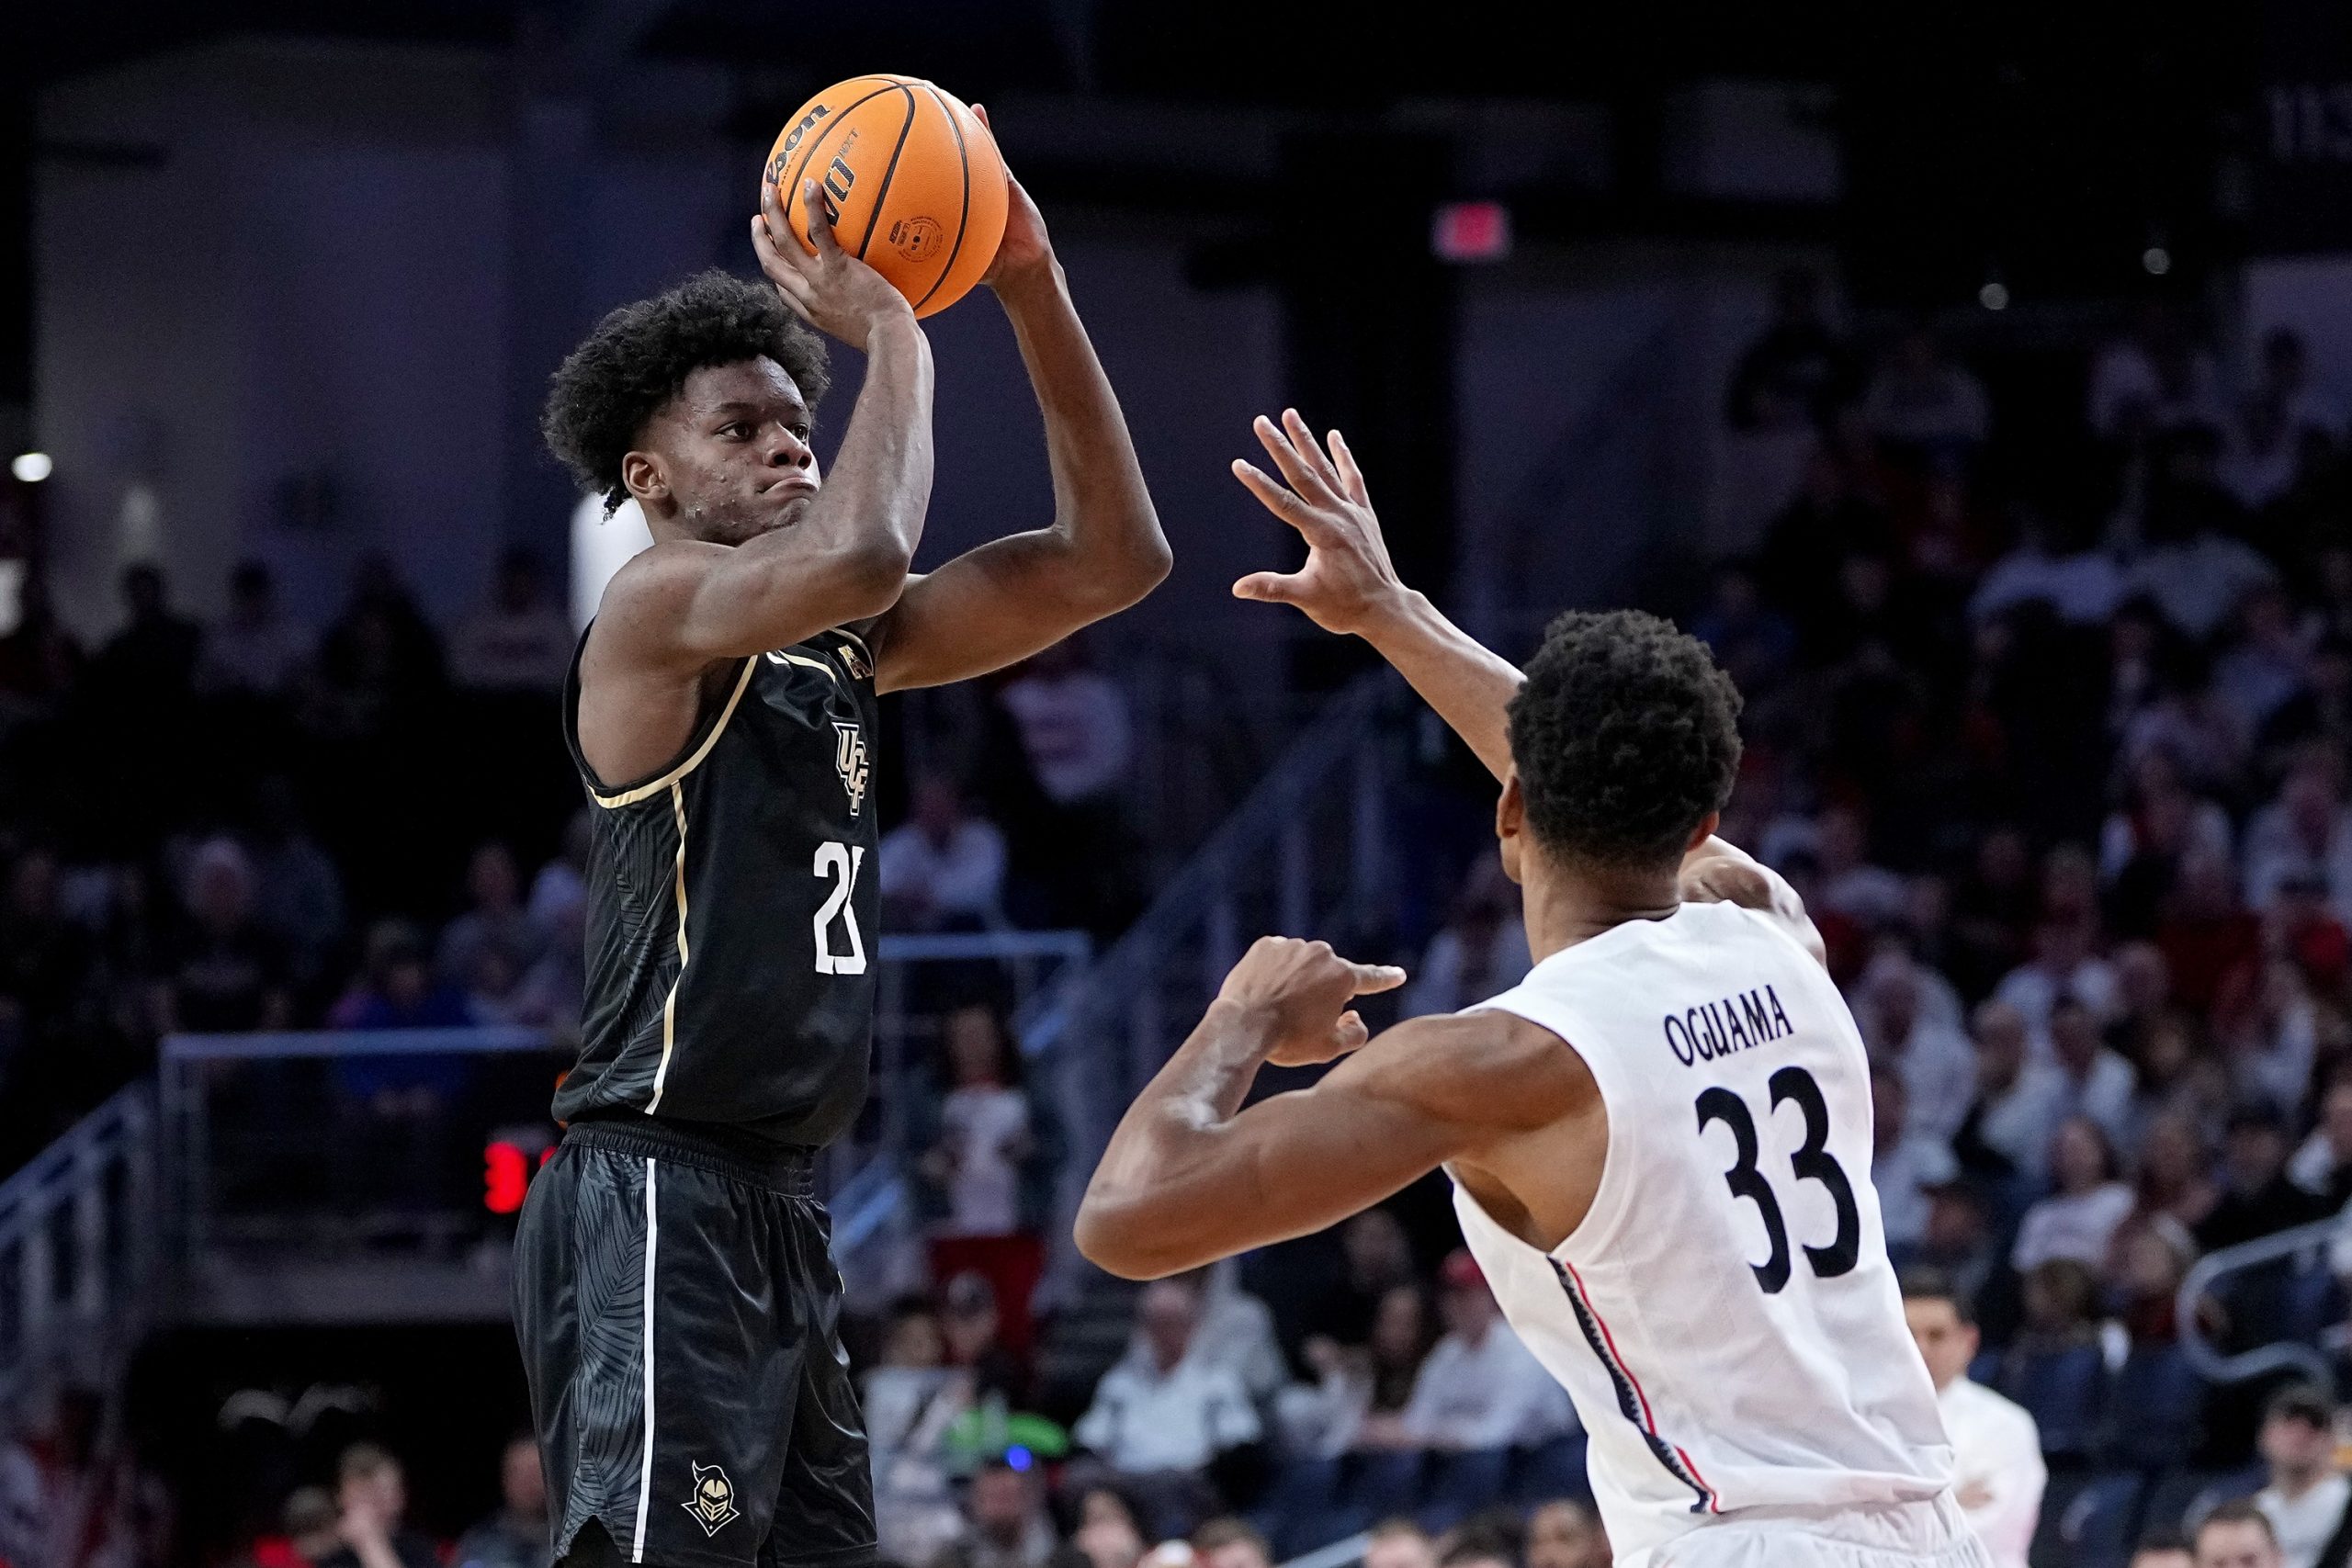 UCF’s Taylor Hendricks is Putting Everyone on Notice as a Projected Lottery Pick in the 2023 NBA Draft